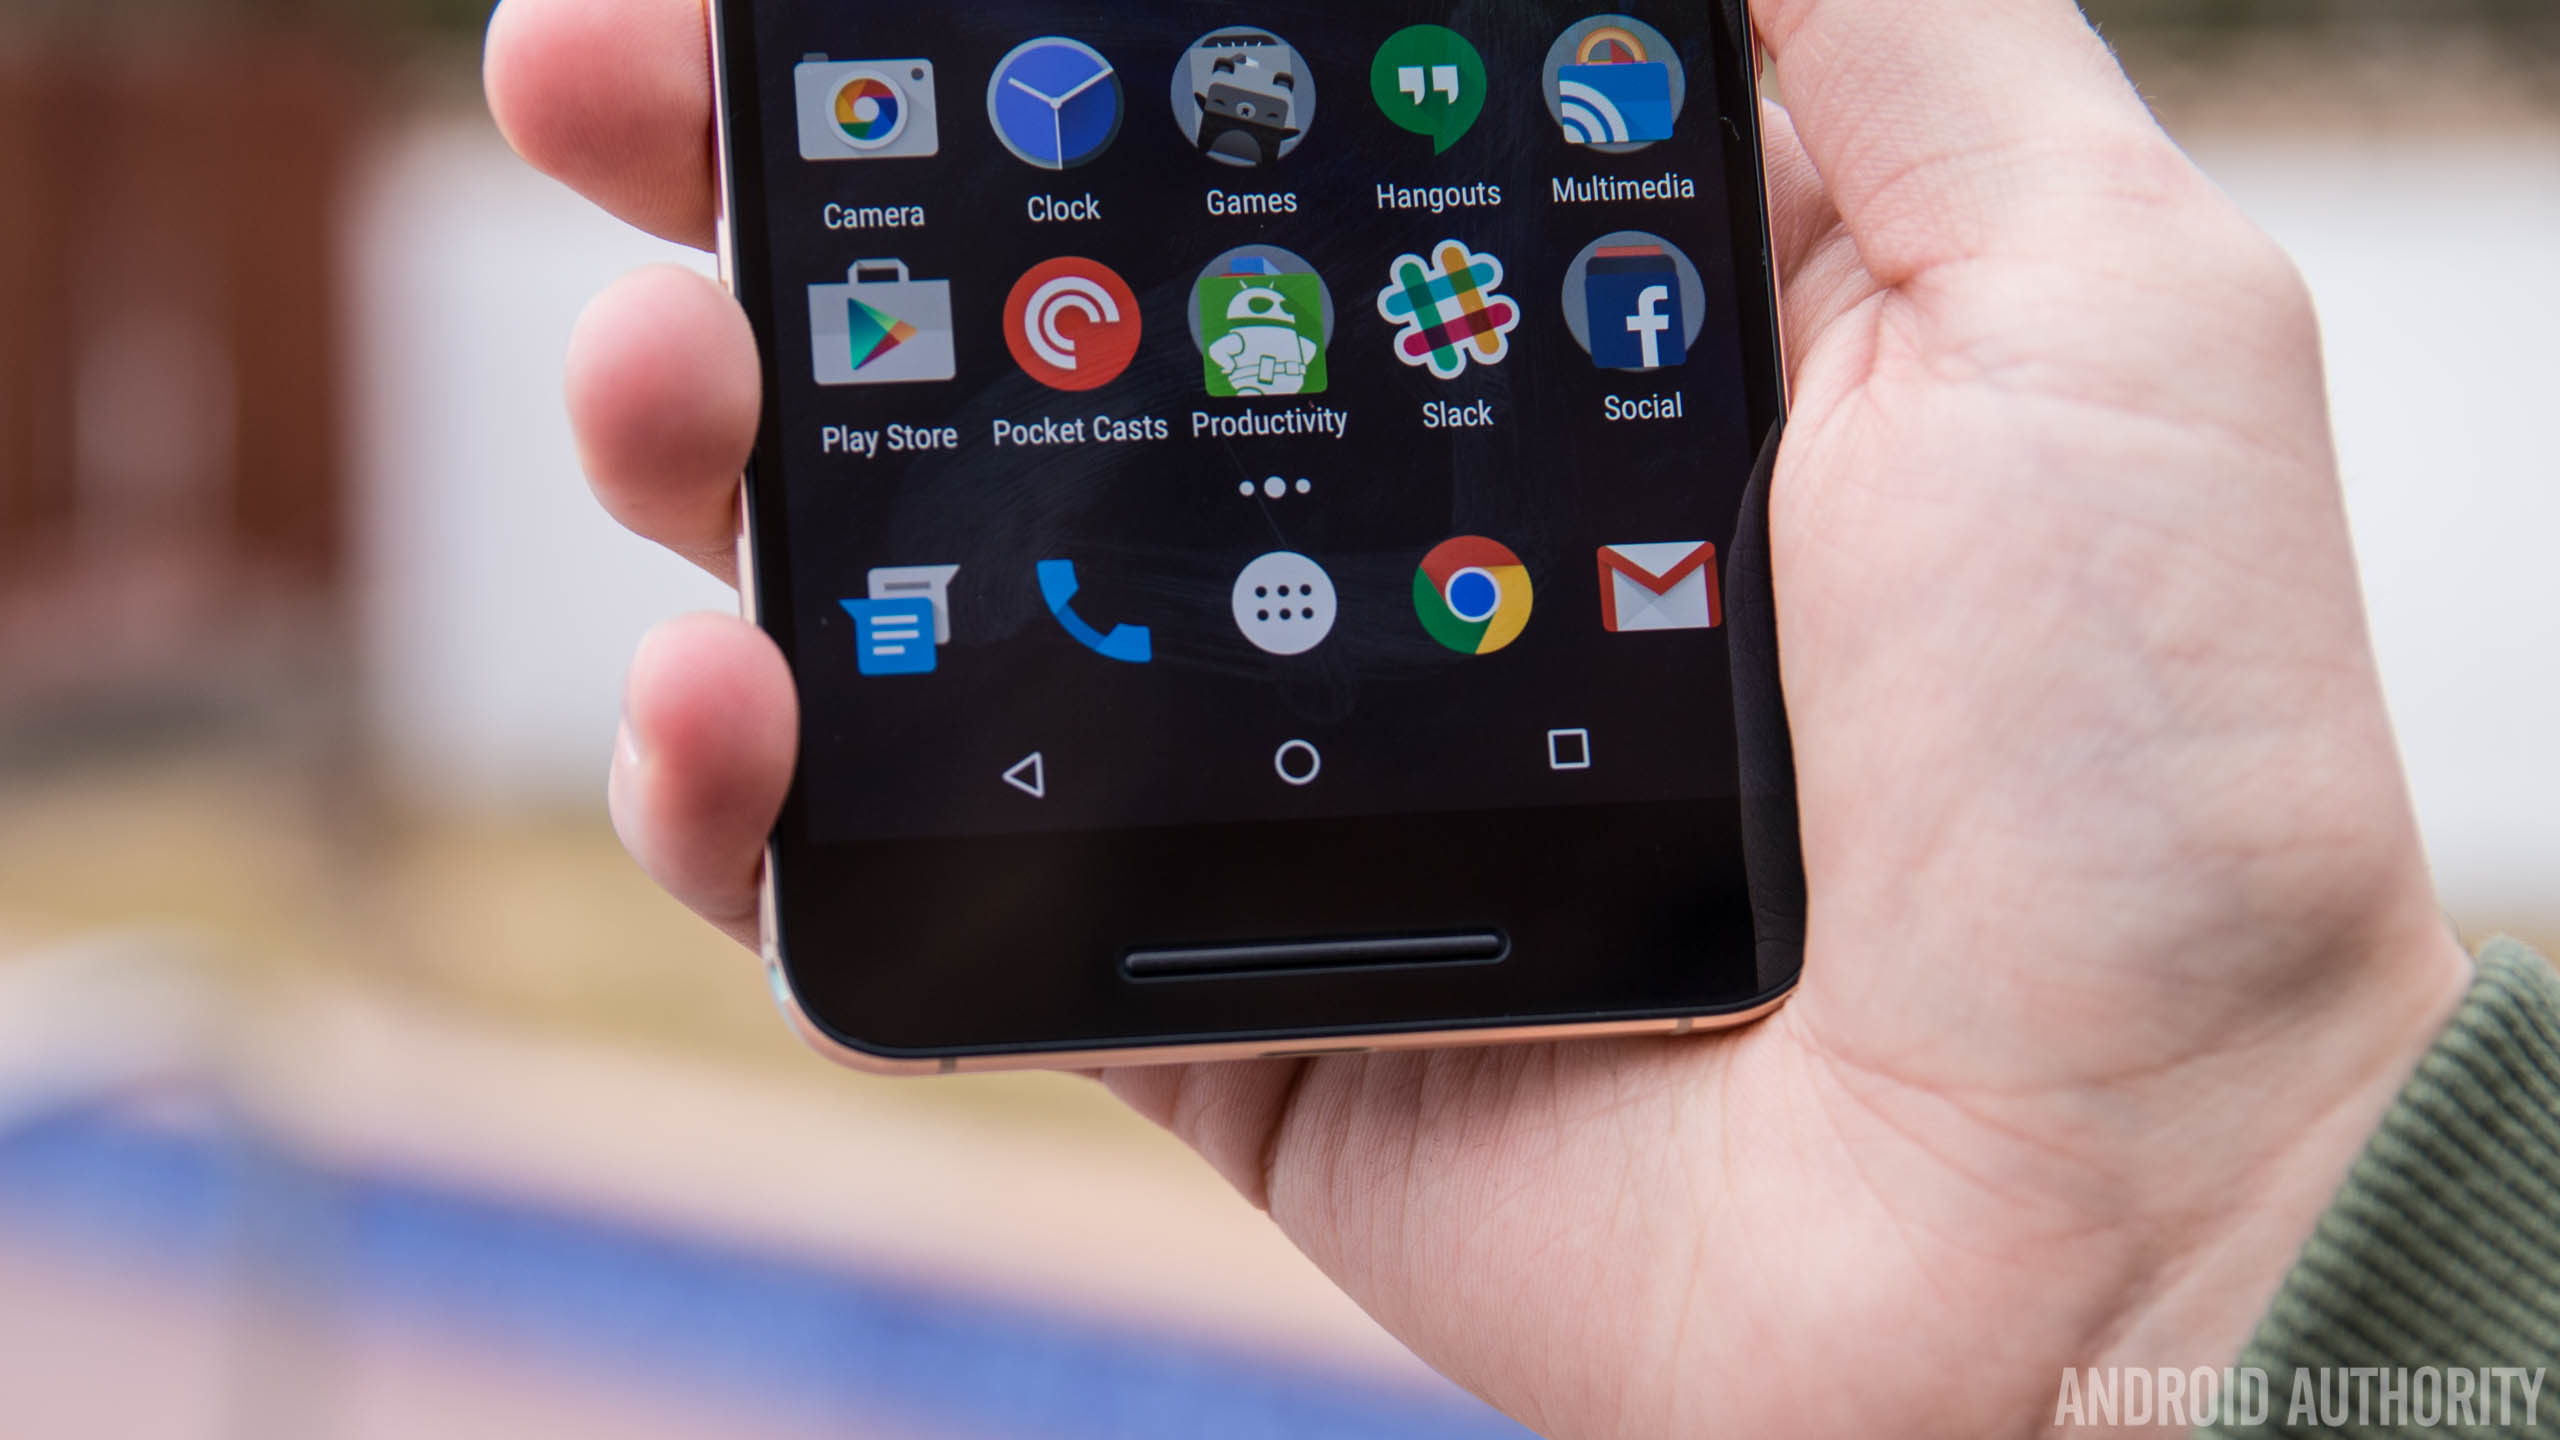 2560x1440 10 best icon packs for Android (by developer)